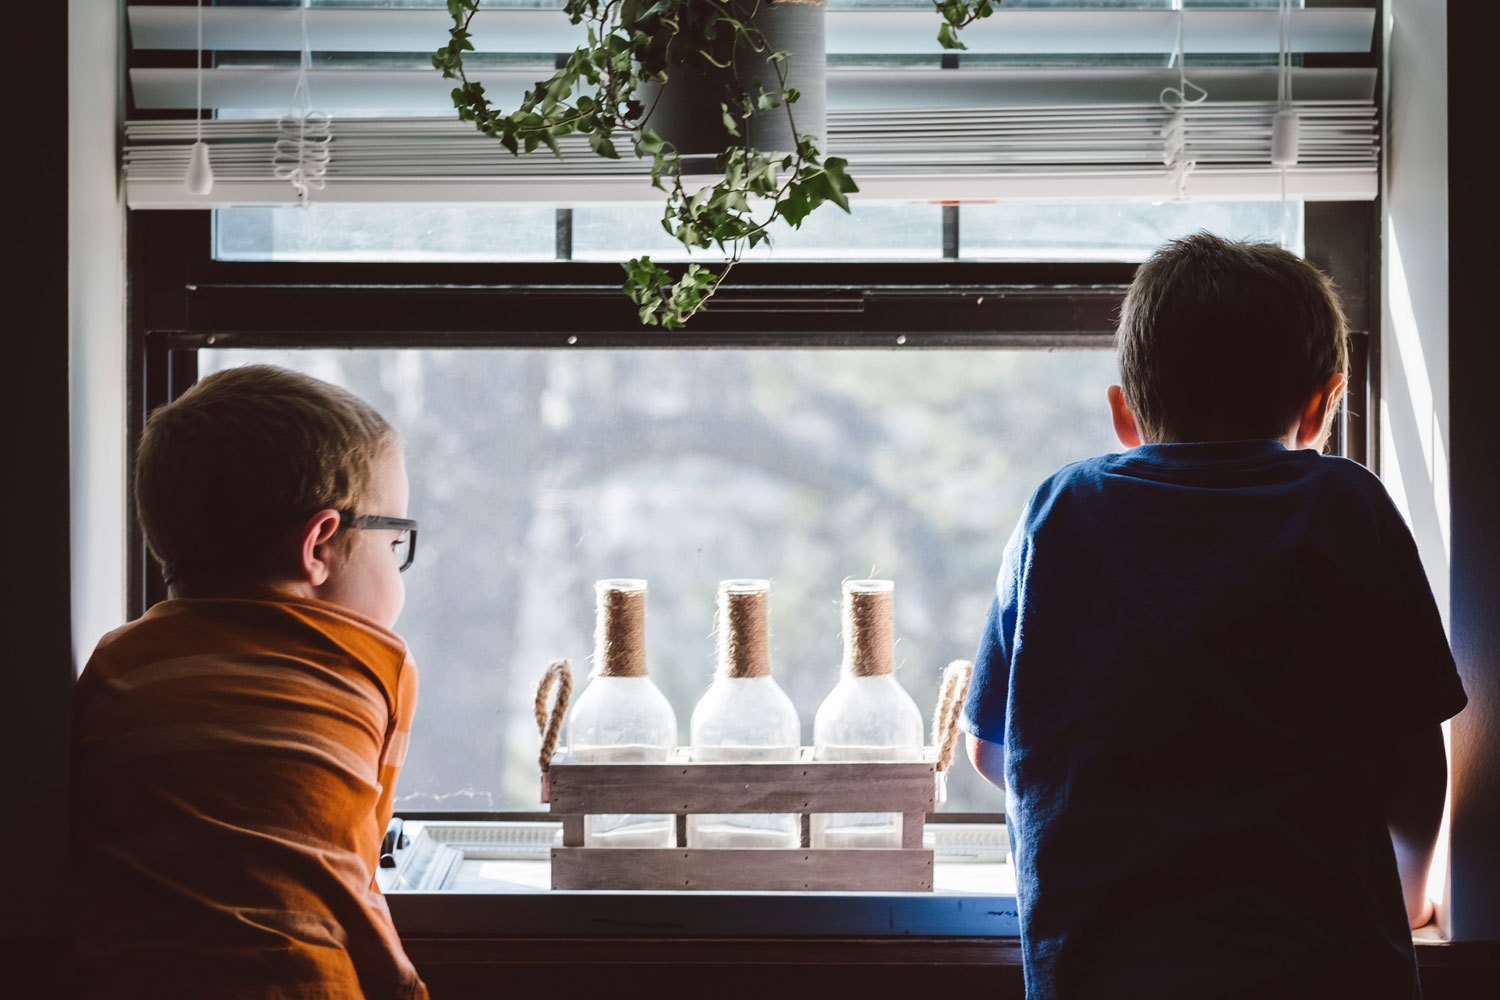 two young boys looking out kitchen window together